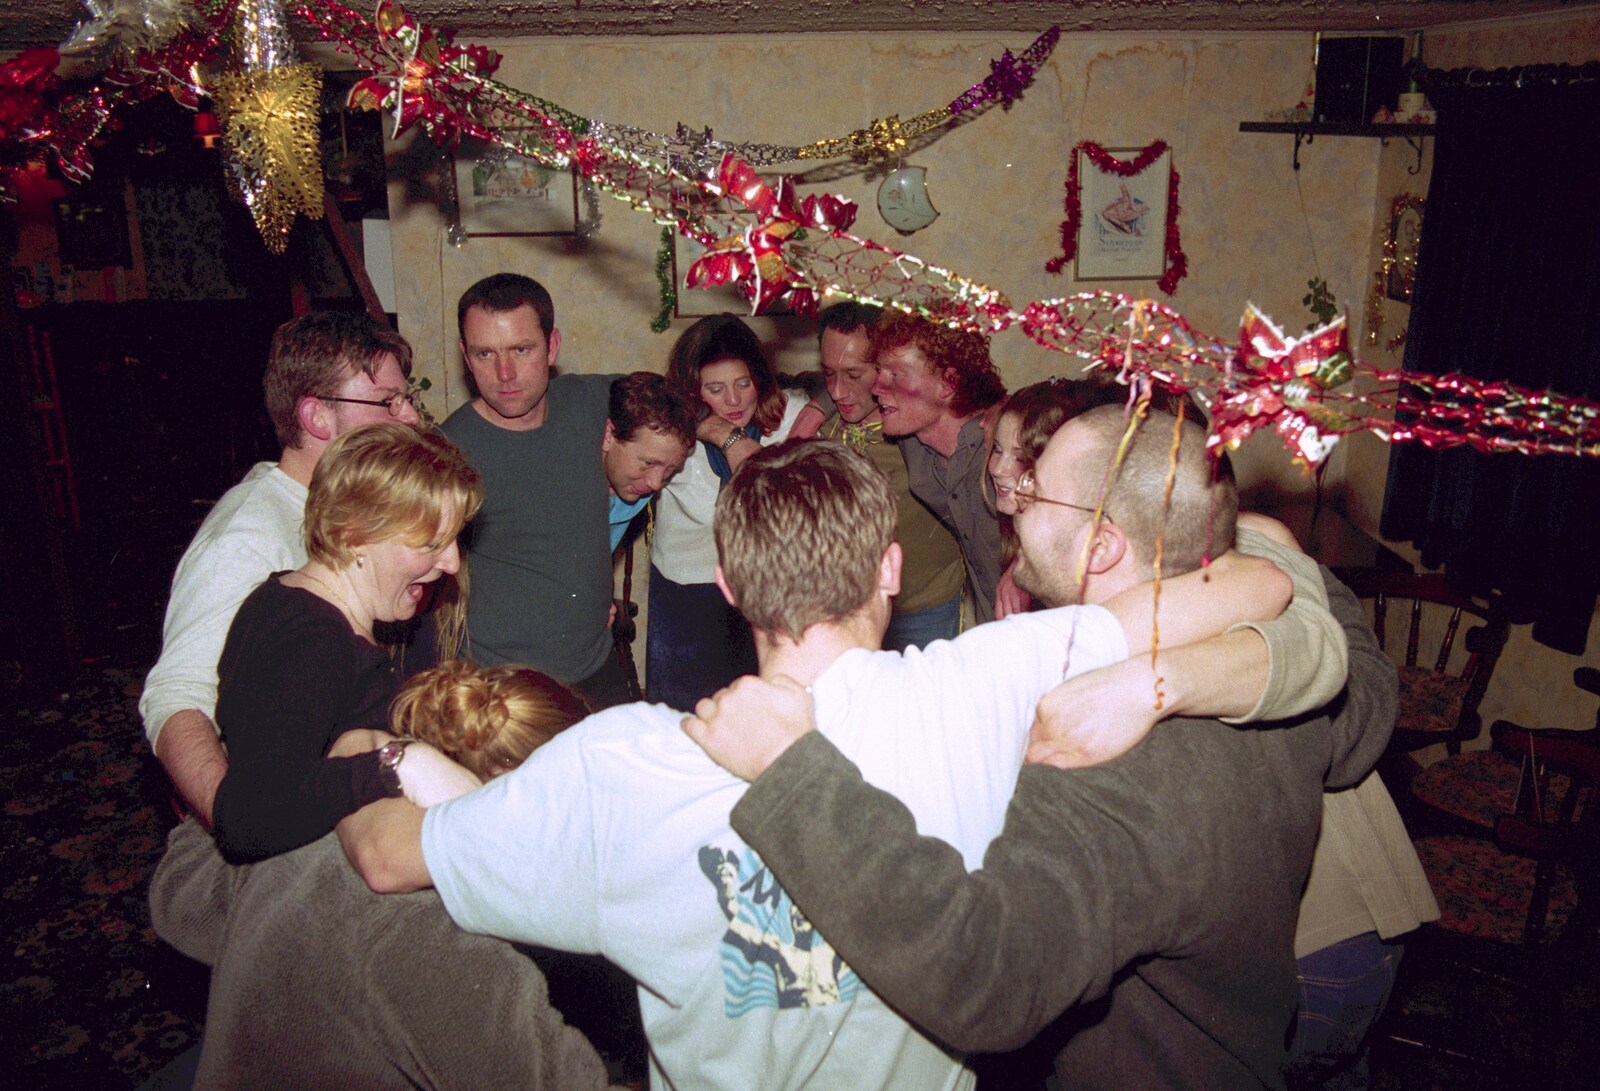 A bit of a group-hug moment from New Year's Eve at The Swan Inn, Brome, Suffolk - 31st December 1999